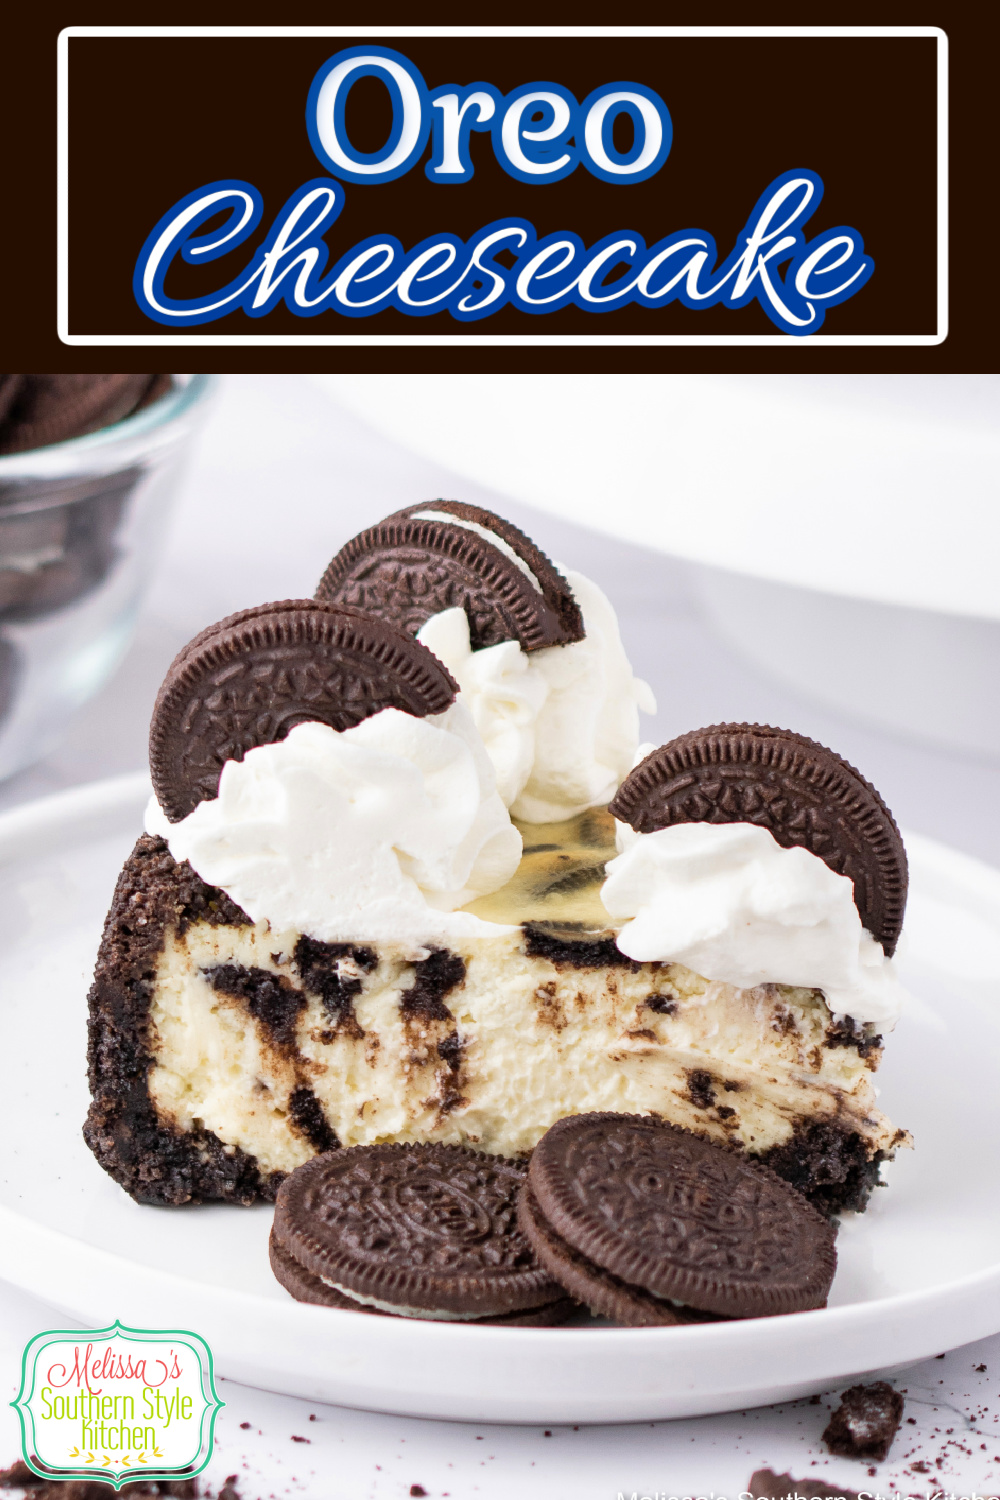 You'll love serving this easy Oreo Cheesecake recipe for dessert! #oreo #cheesecake #cheesecakerecipes #oreocheesecake #chocolate #oreorecipes #desserts via @melissasssk